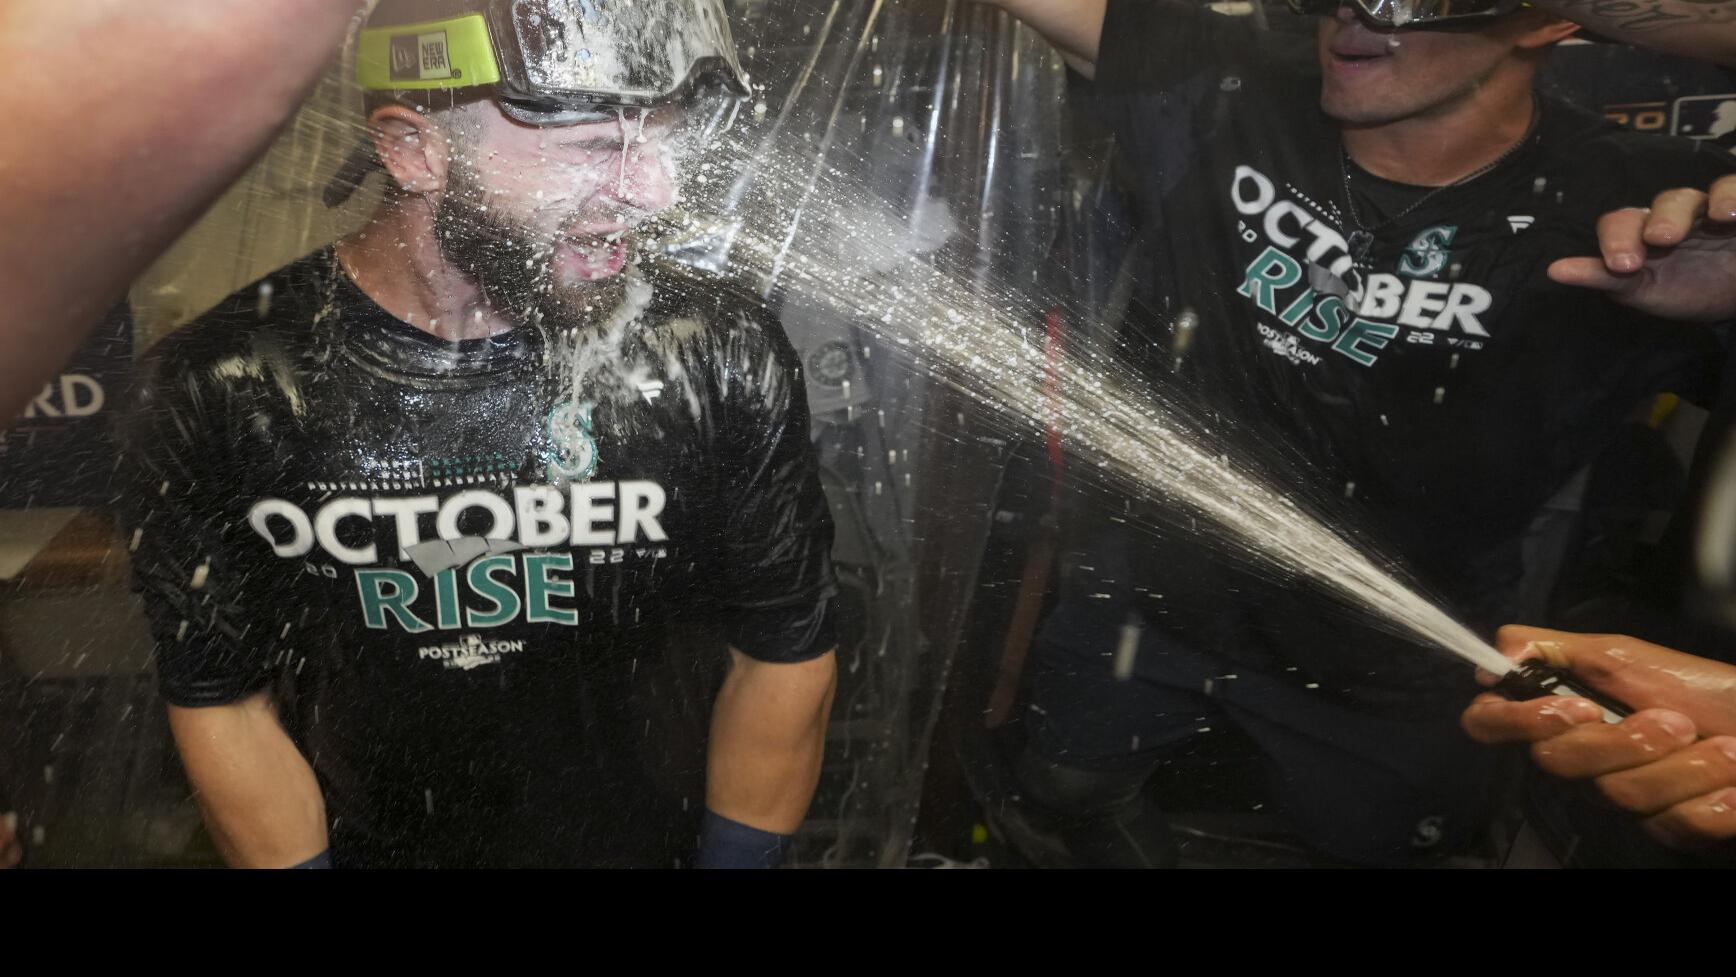 Mariners erase 7-run deficit, sweep Blue Jays to advance to ALDS